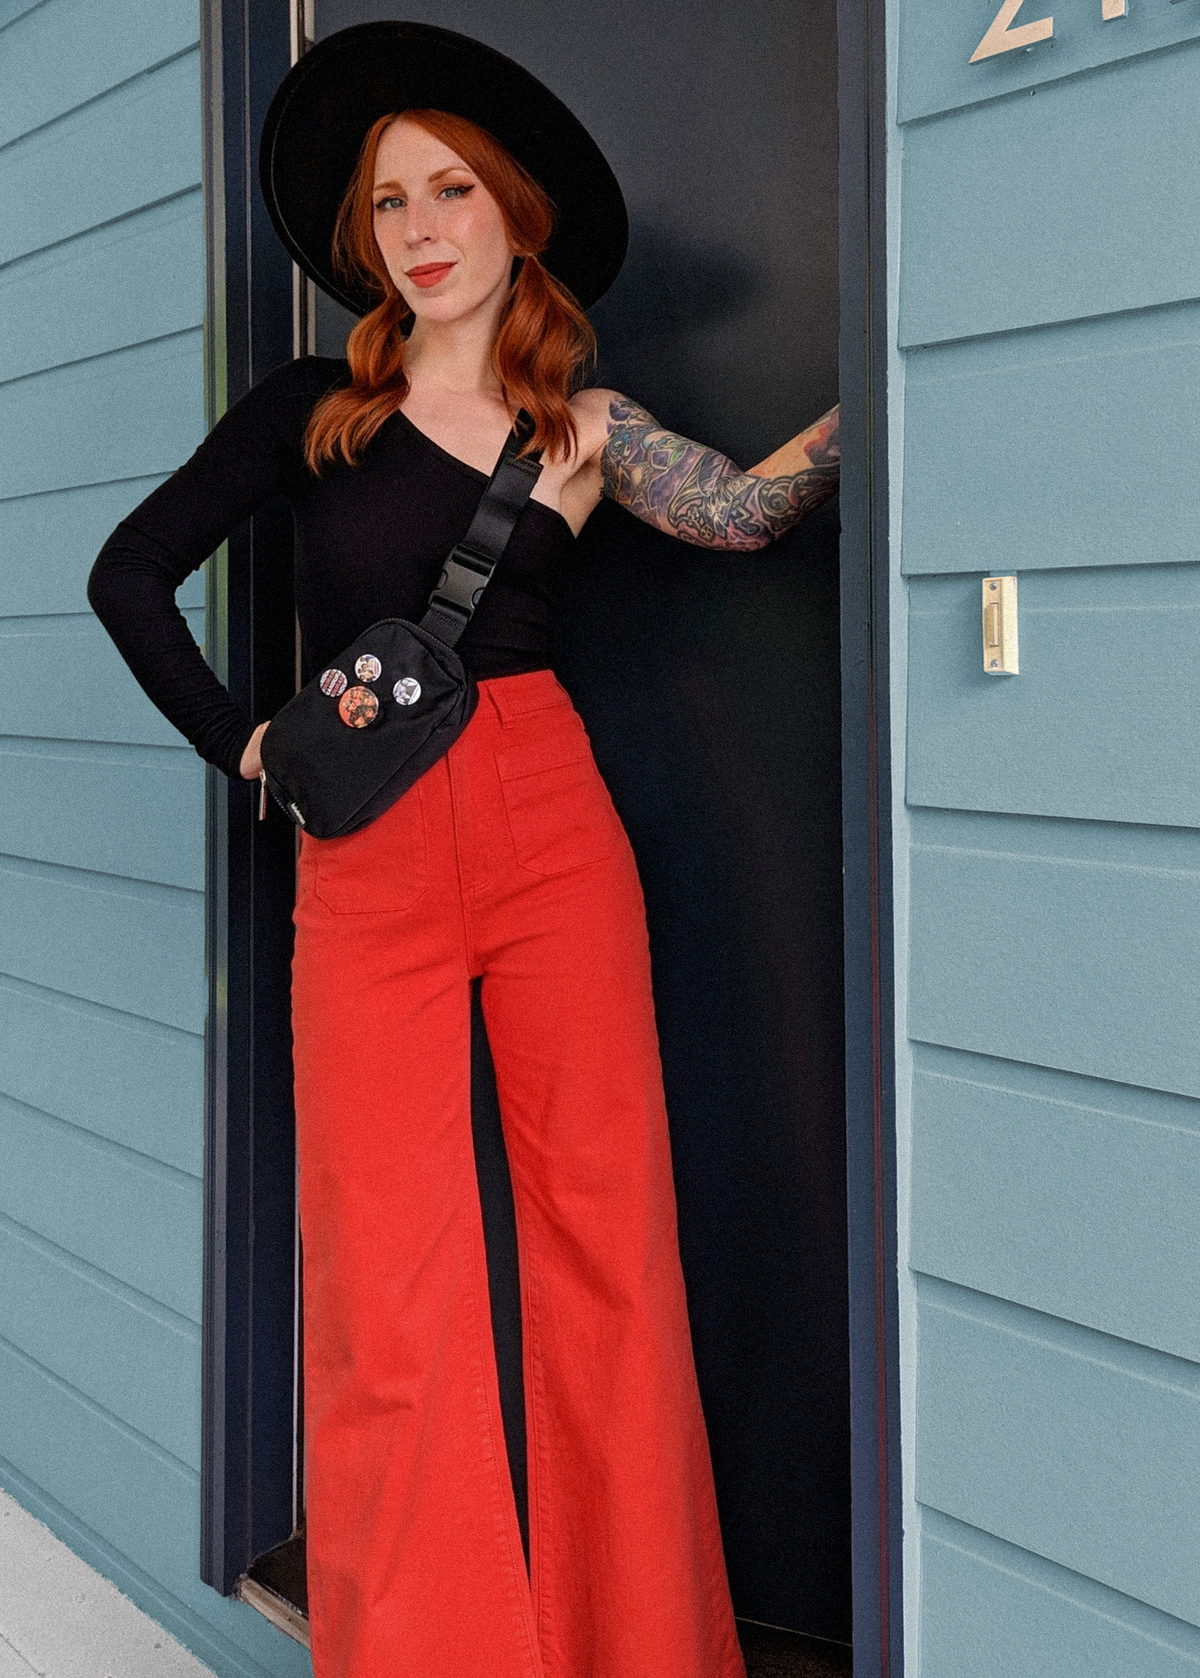 70s inspired Blood Orange Red high rise waist Sailor Patch Front Pocket Stretch Cotton Denim Ankle Length Wide Leg Pants by Rolla's Jeans